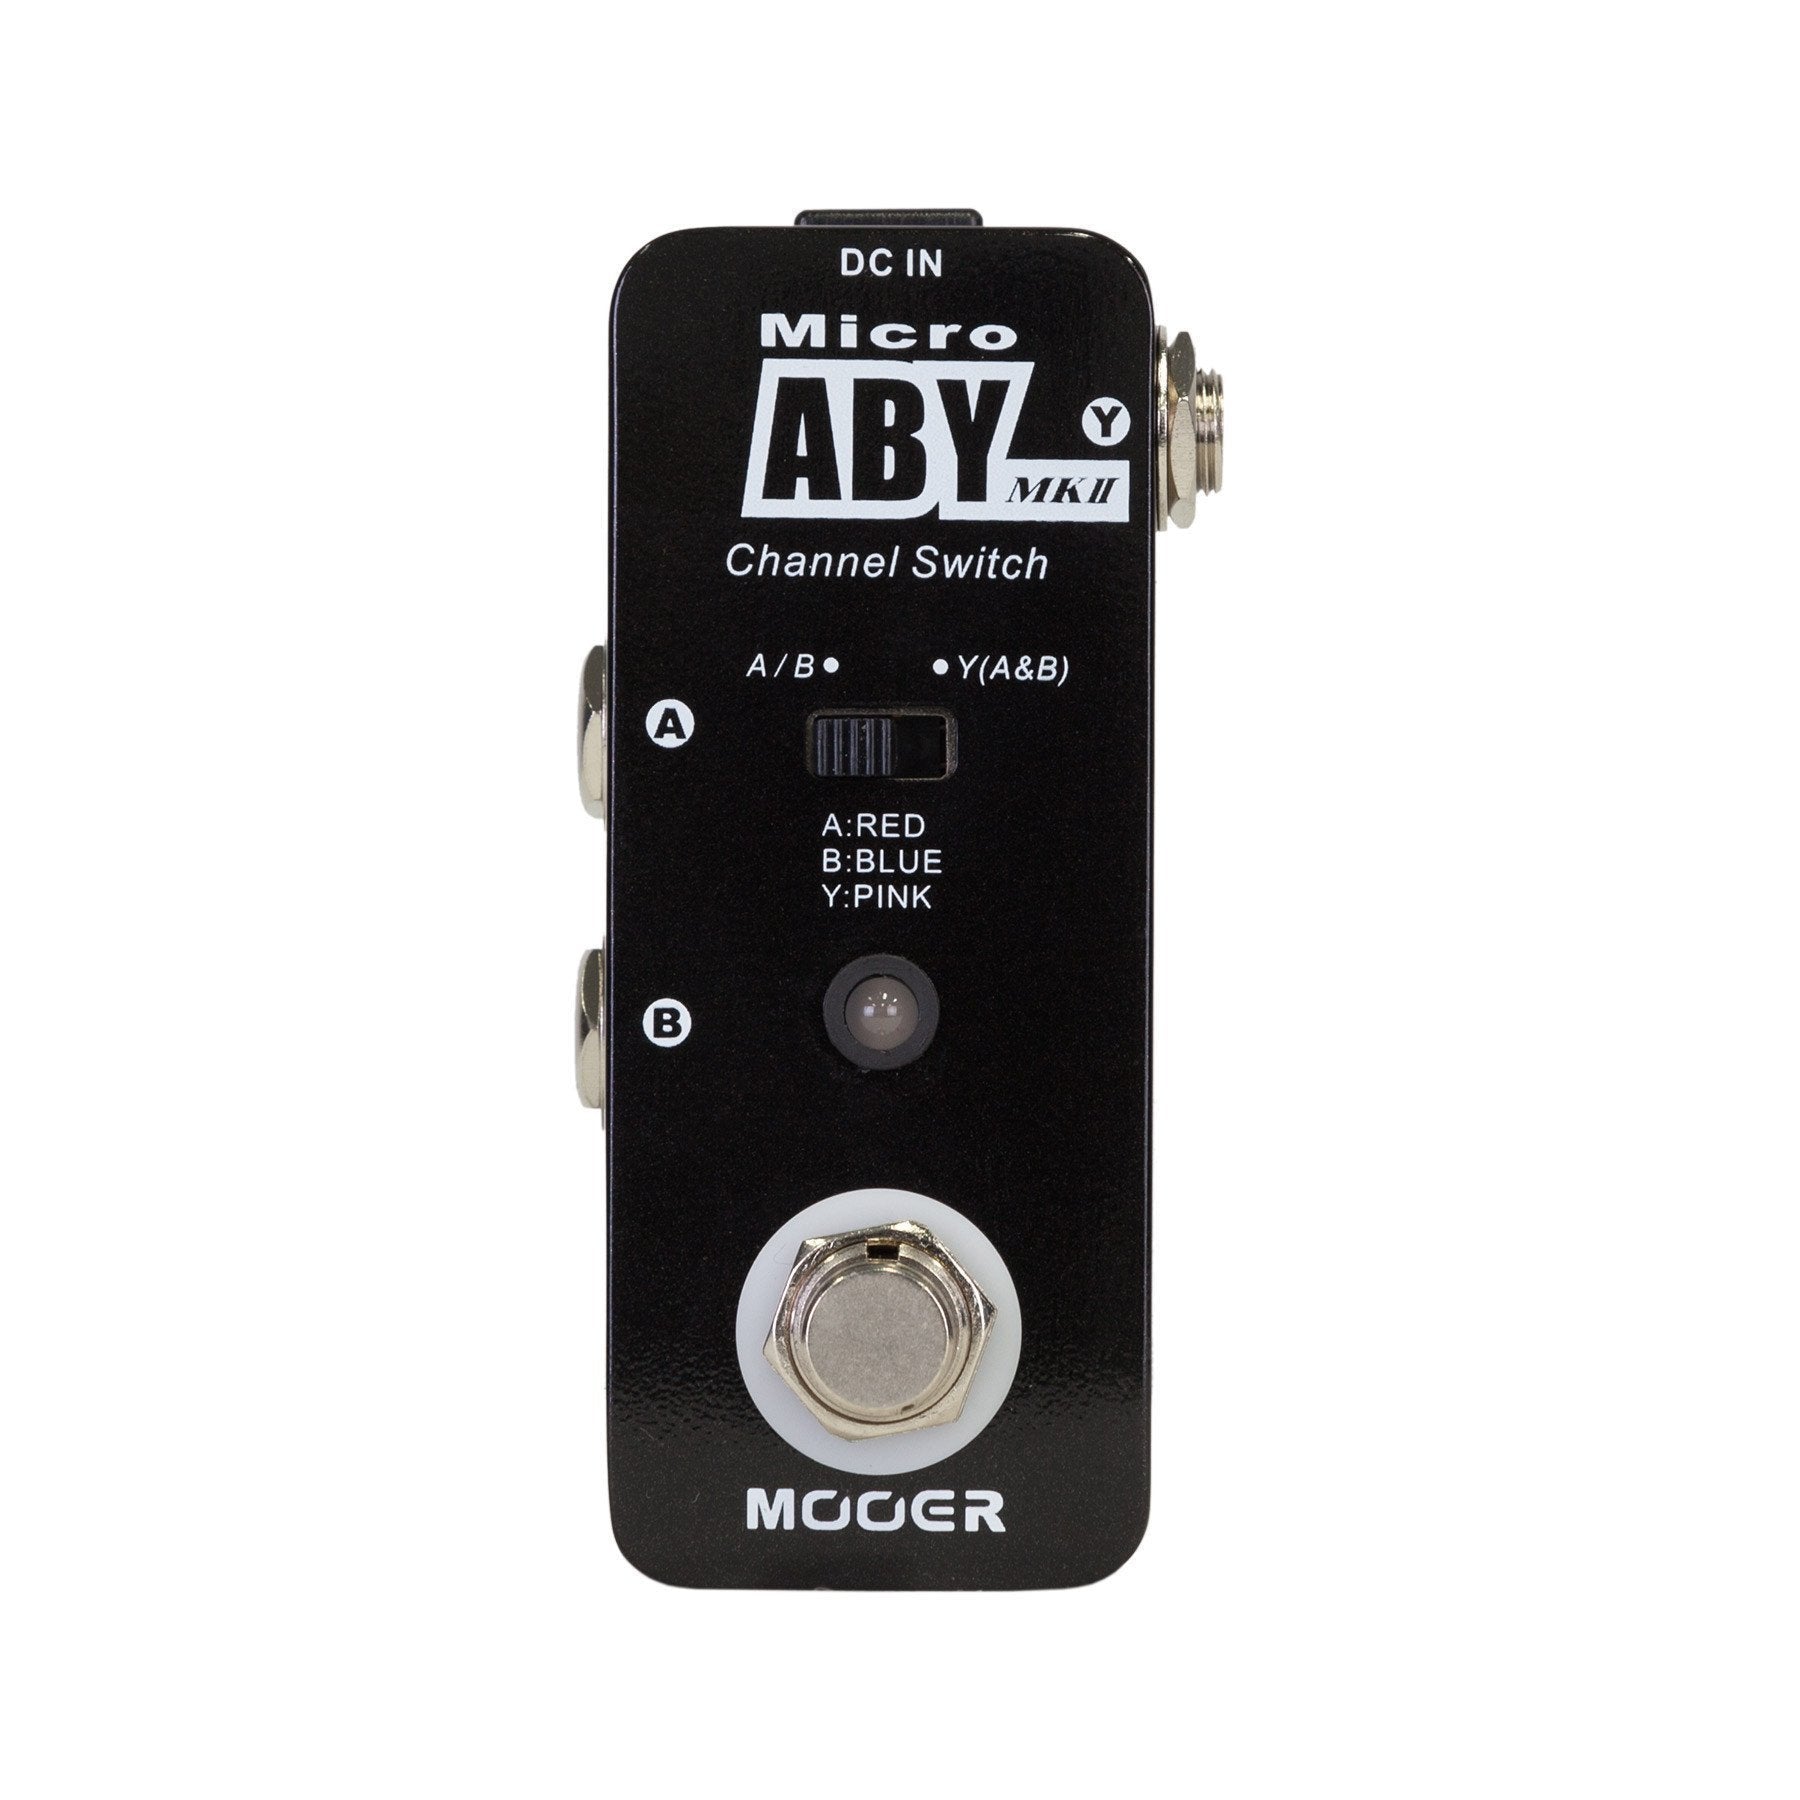 Mooer Micro MEP-ABY2 ABY MkII Channel Switcher